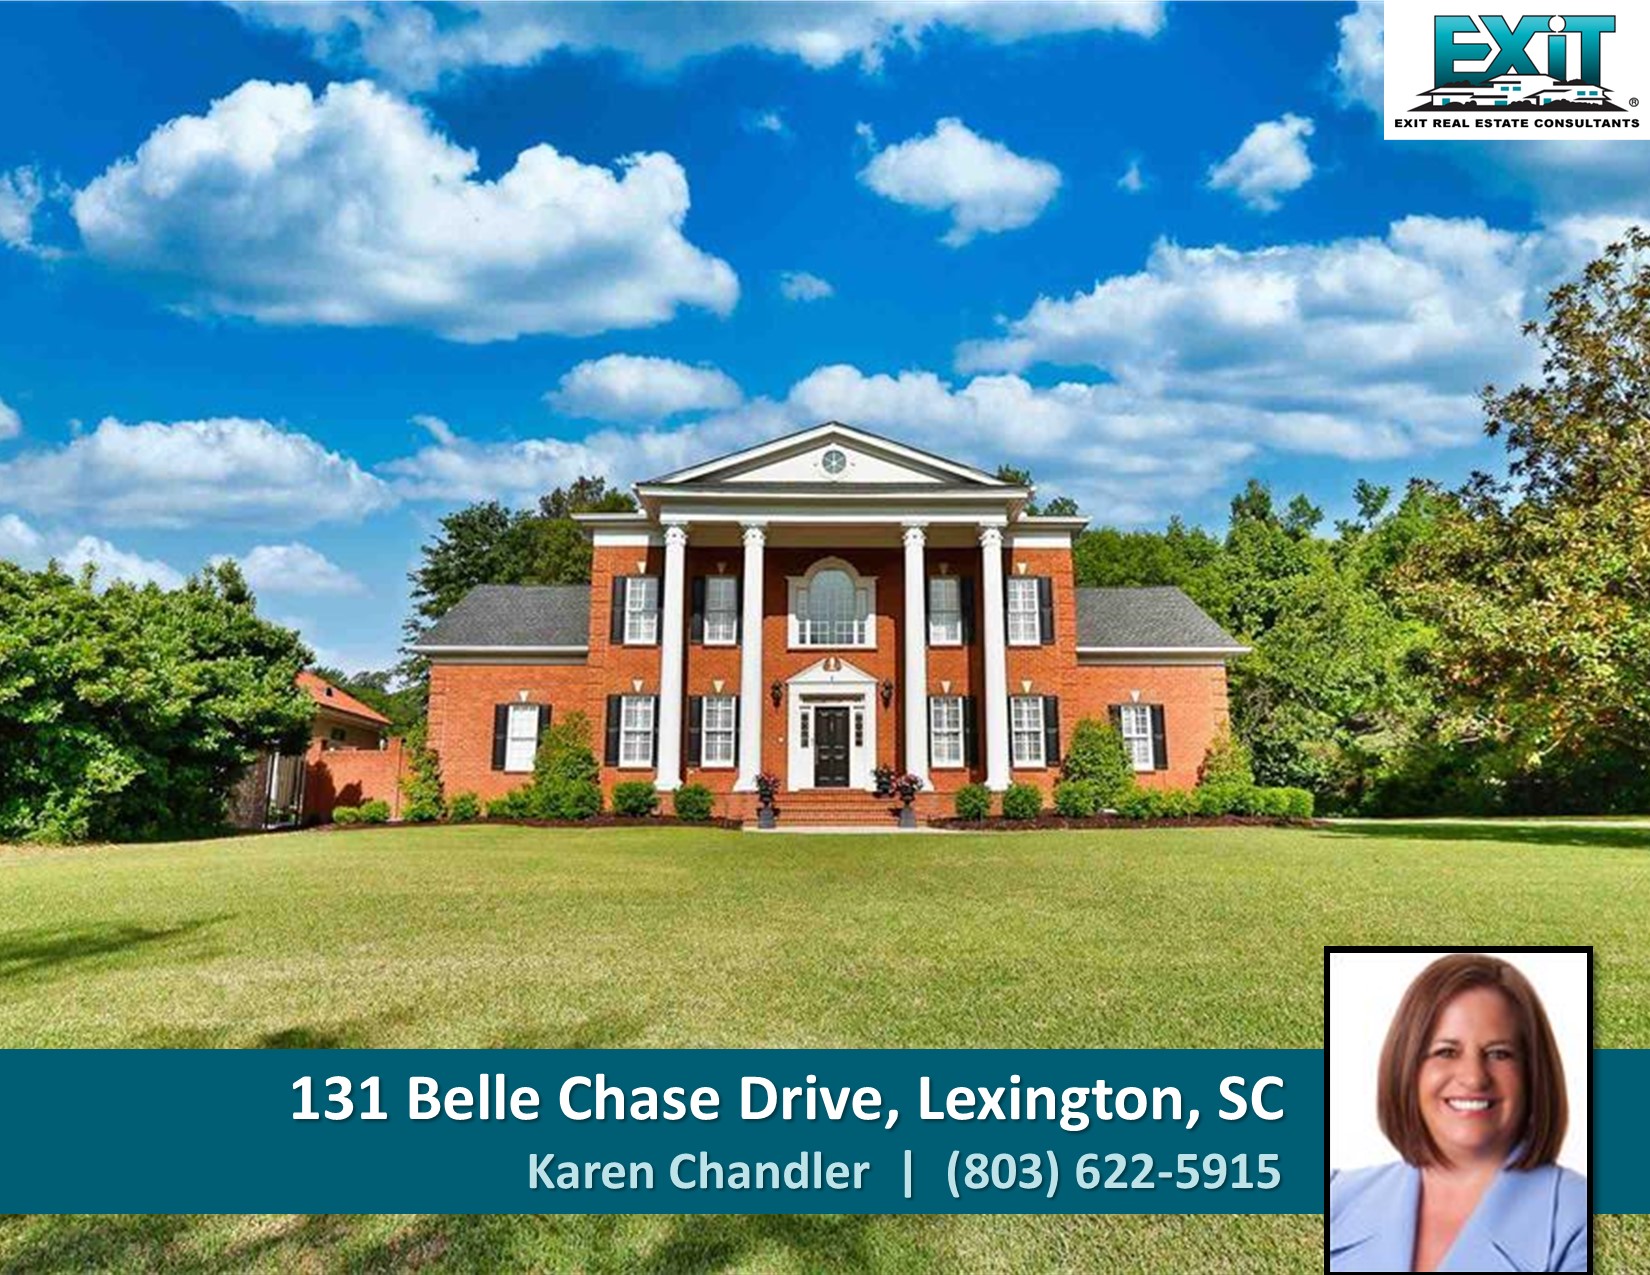 Just listed in Belle Chase